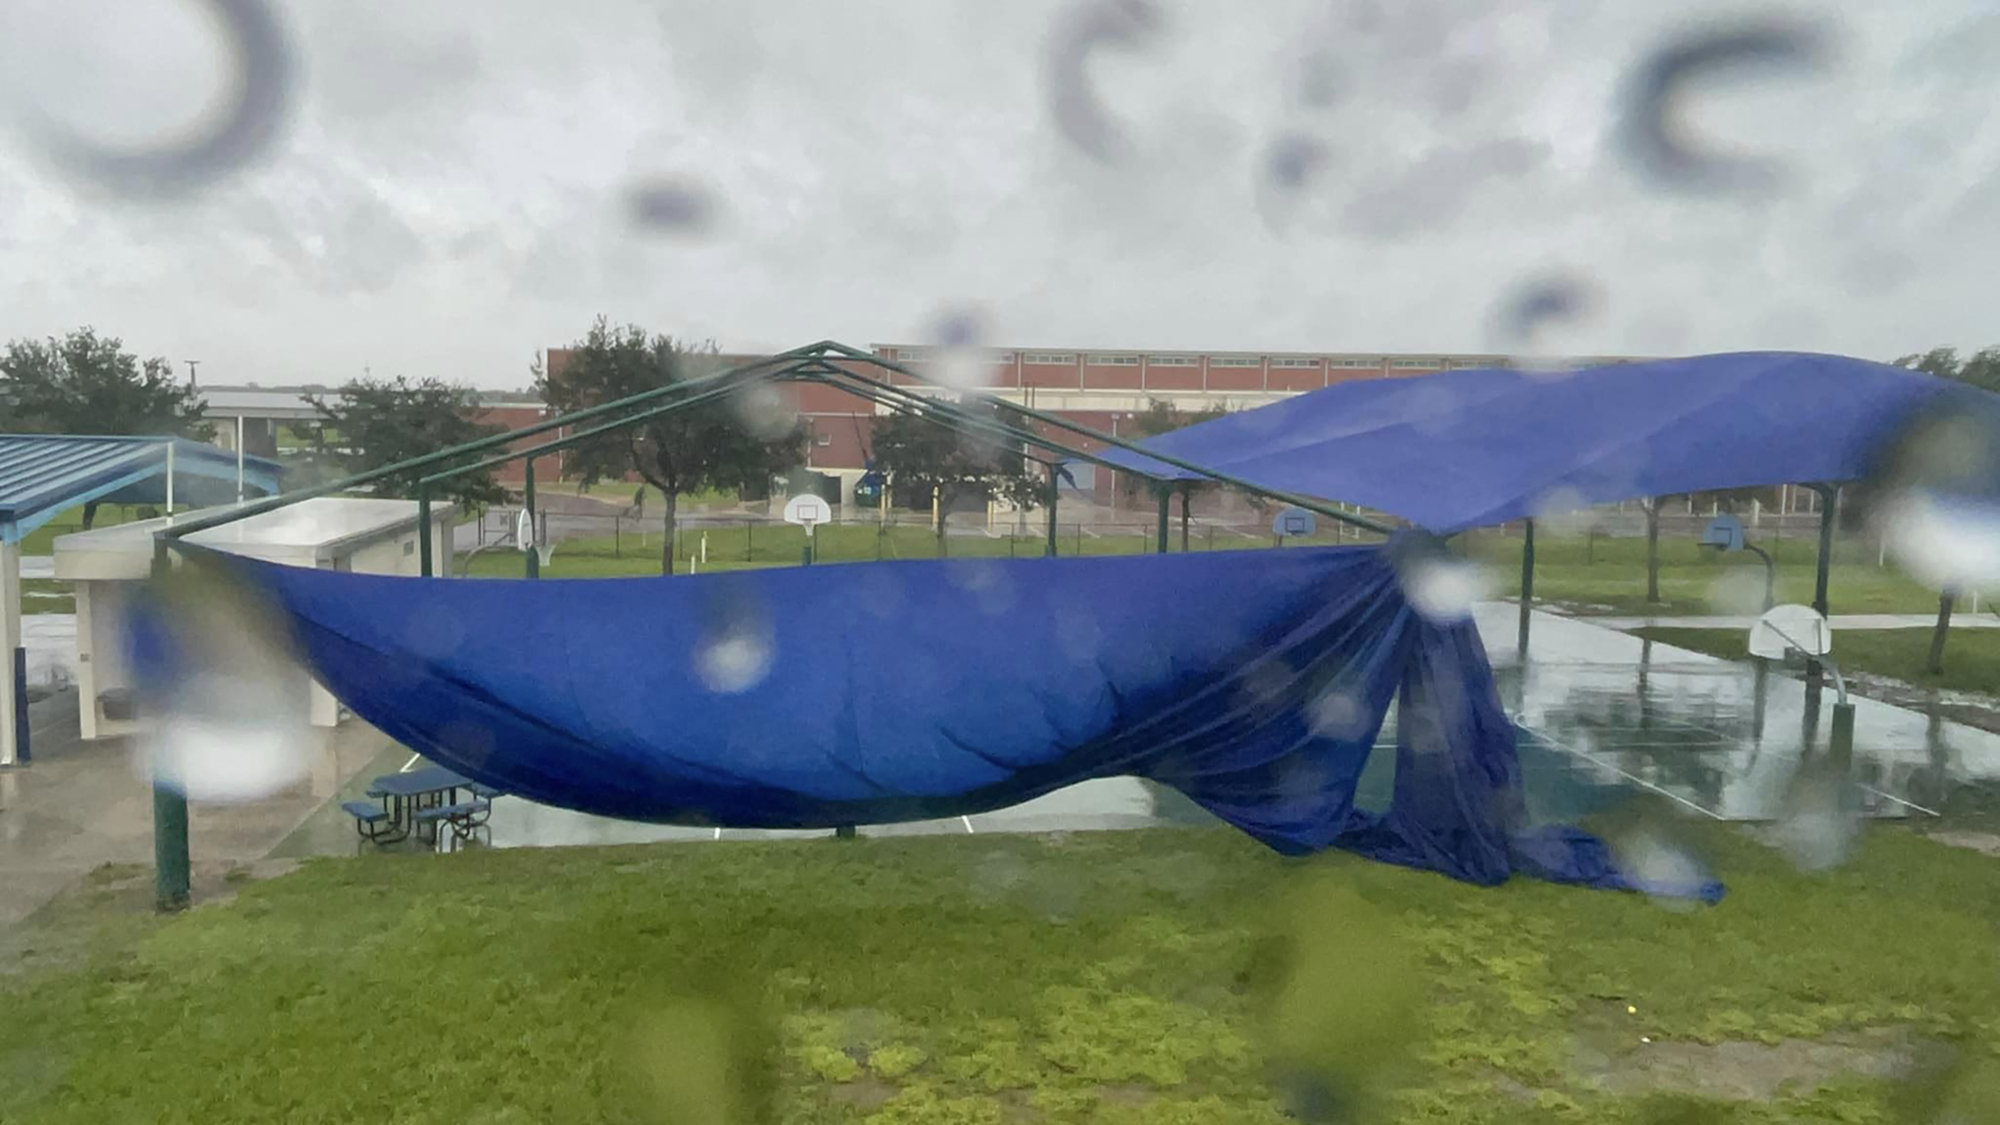 The cover of a play area at B.D. Gullett Elementary School was ripped off due to the strong winds. (Photo courtesy of Gullett Elementary, posted 4:45 p.m. Wednesday)